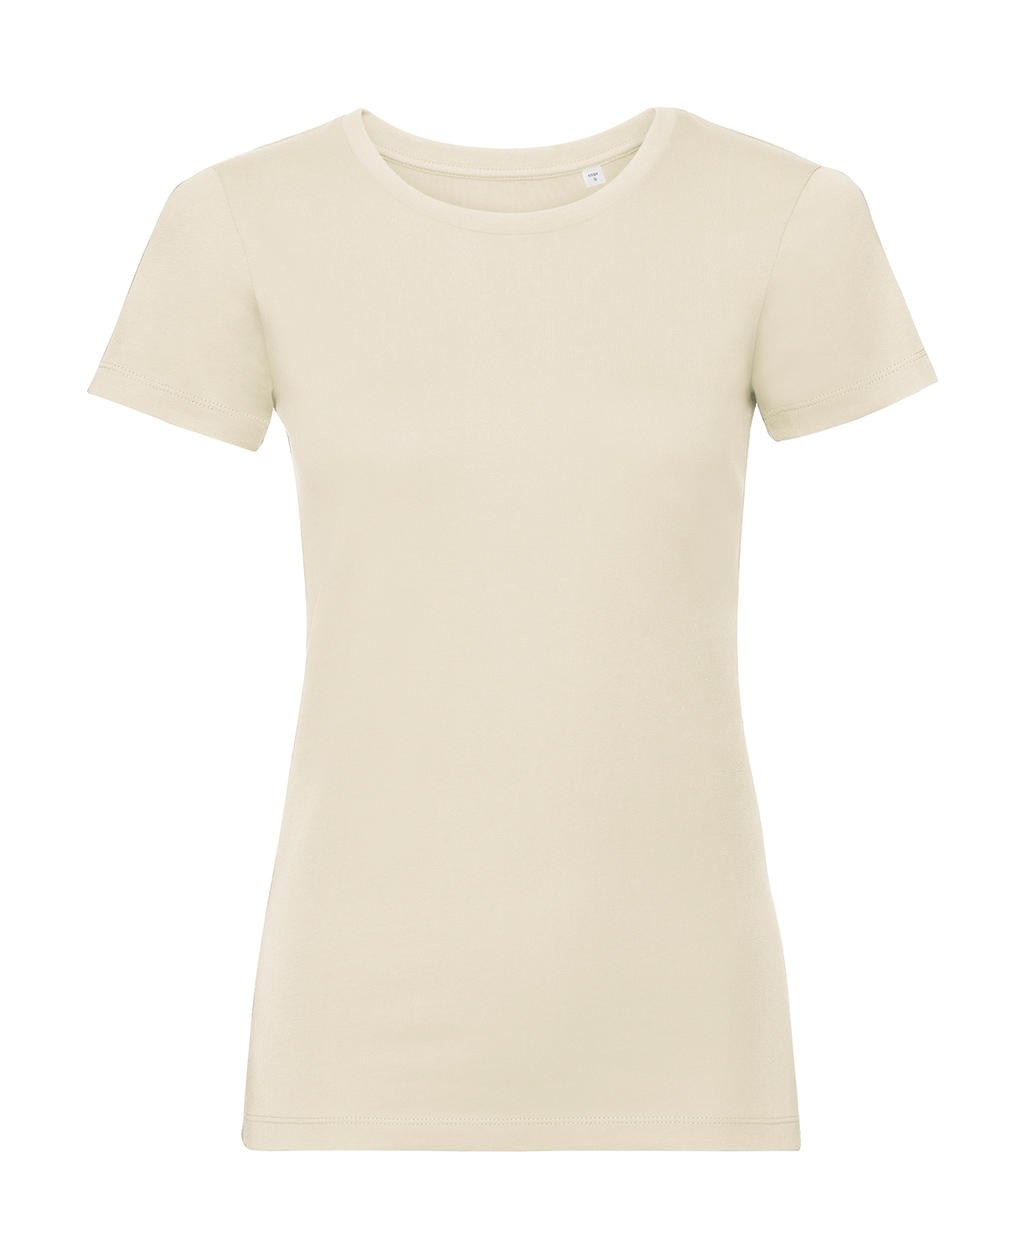  Ladies? Pure Organic Tee in Farbe Natural